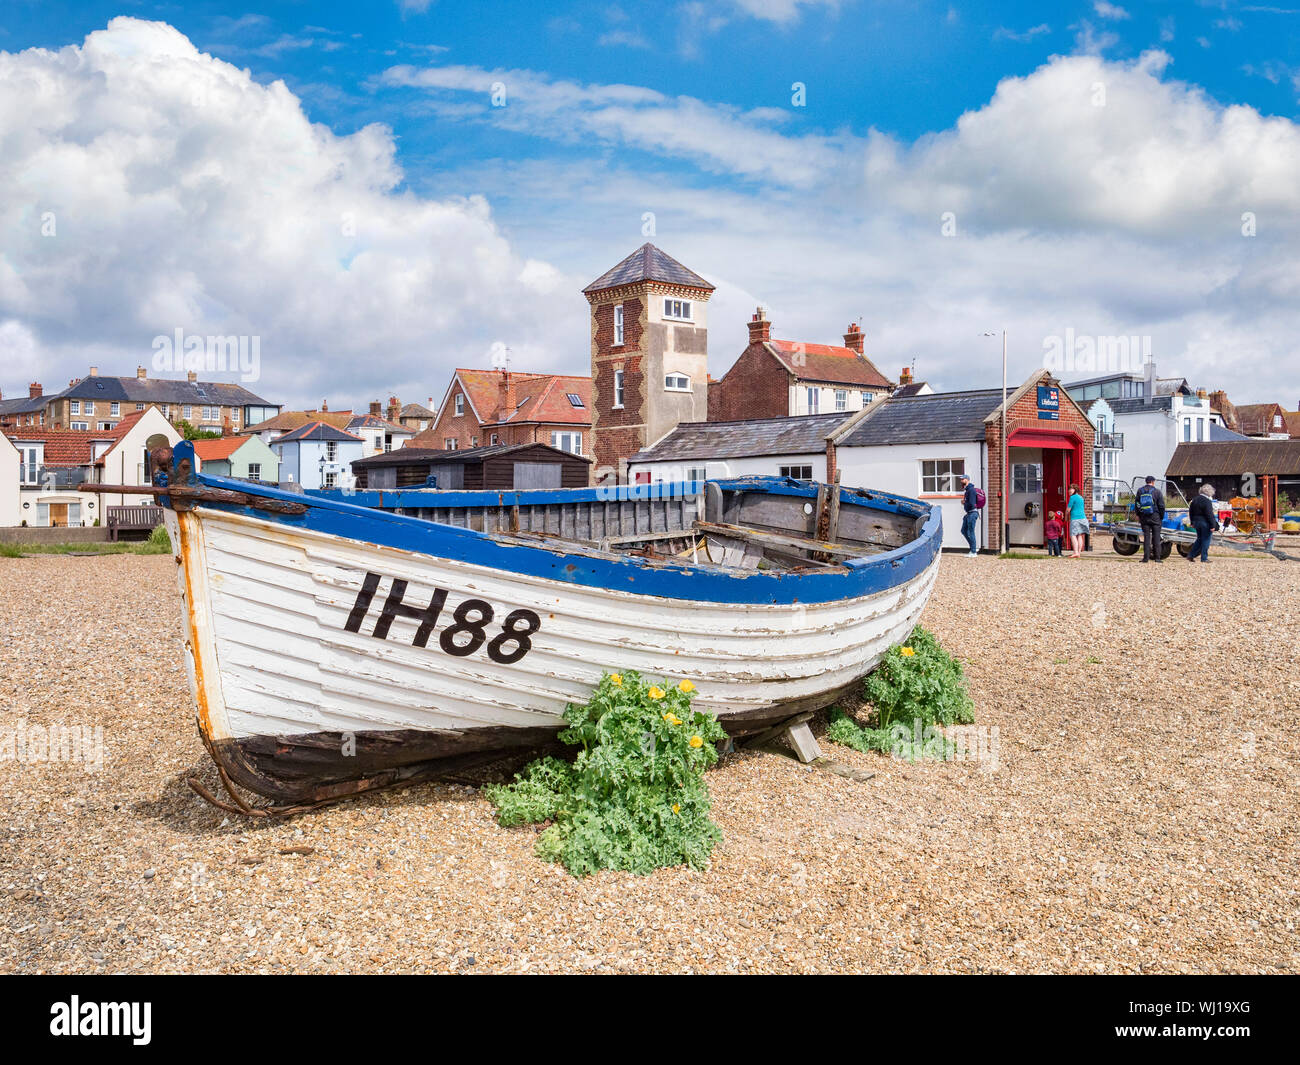 16 June 2019: Aldeburgh, Suffolk, UK - Old boat on the beach, with the RNLI Lifeboat Station and people sightseeing. Sunny summer day. Stock Photo